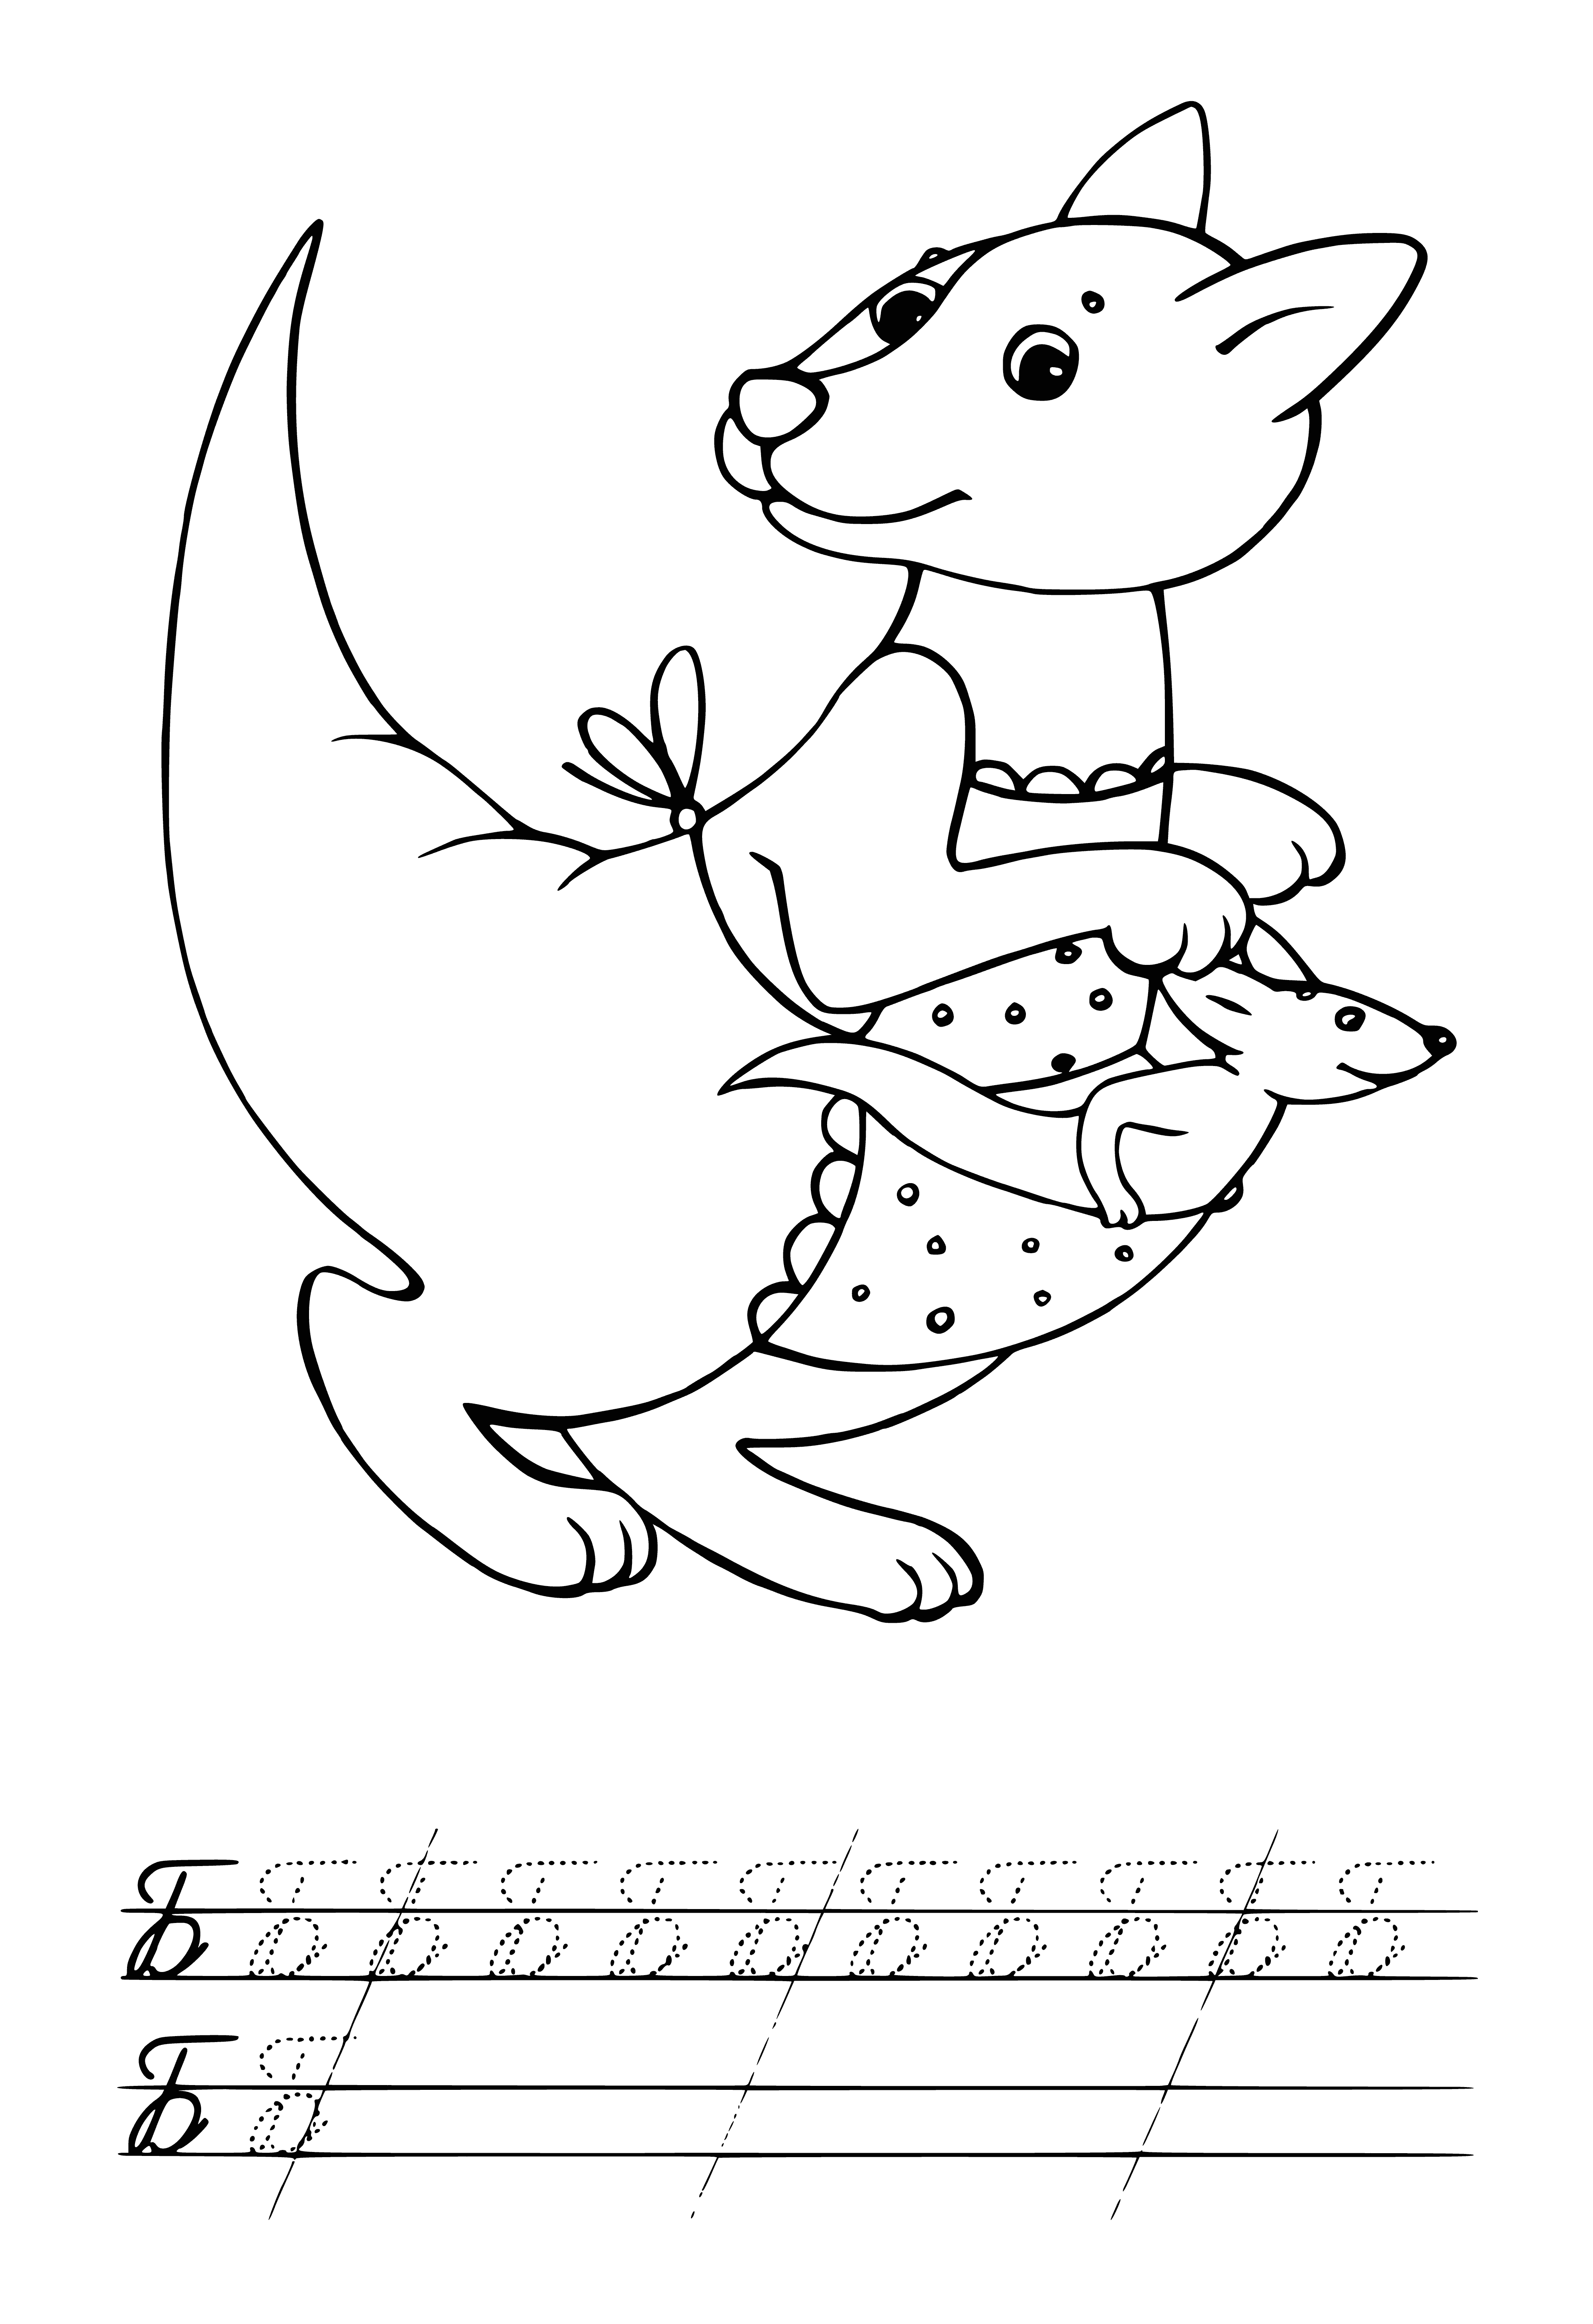 coloring page: Kangaroos are native to Australia and the largest surviving marsupial. 2011 saw 34.3 million in the country, up from 25.1 million in 2009.